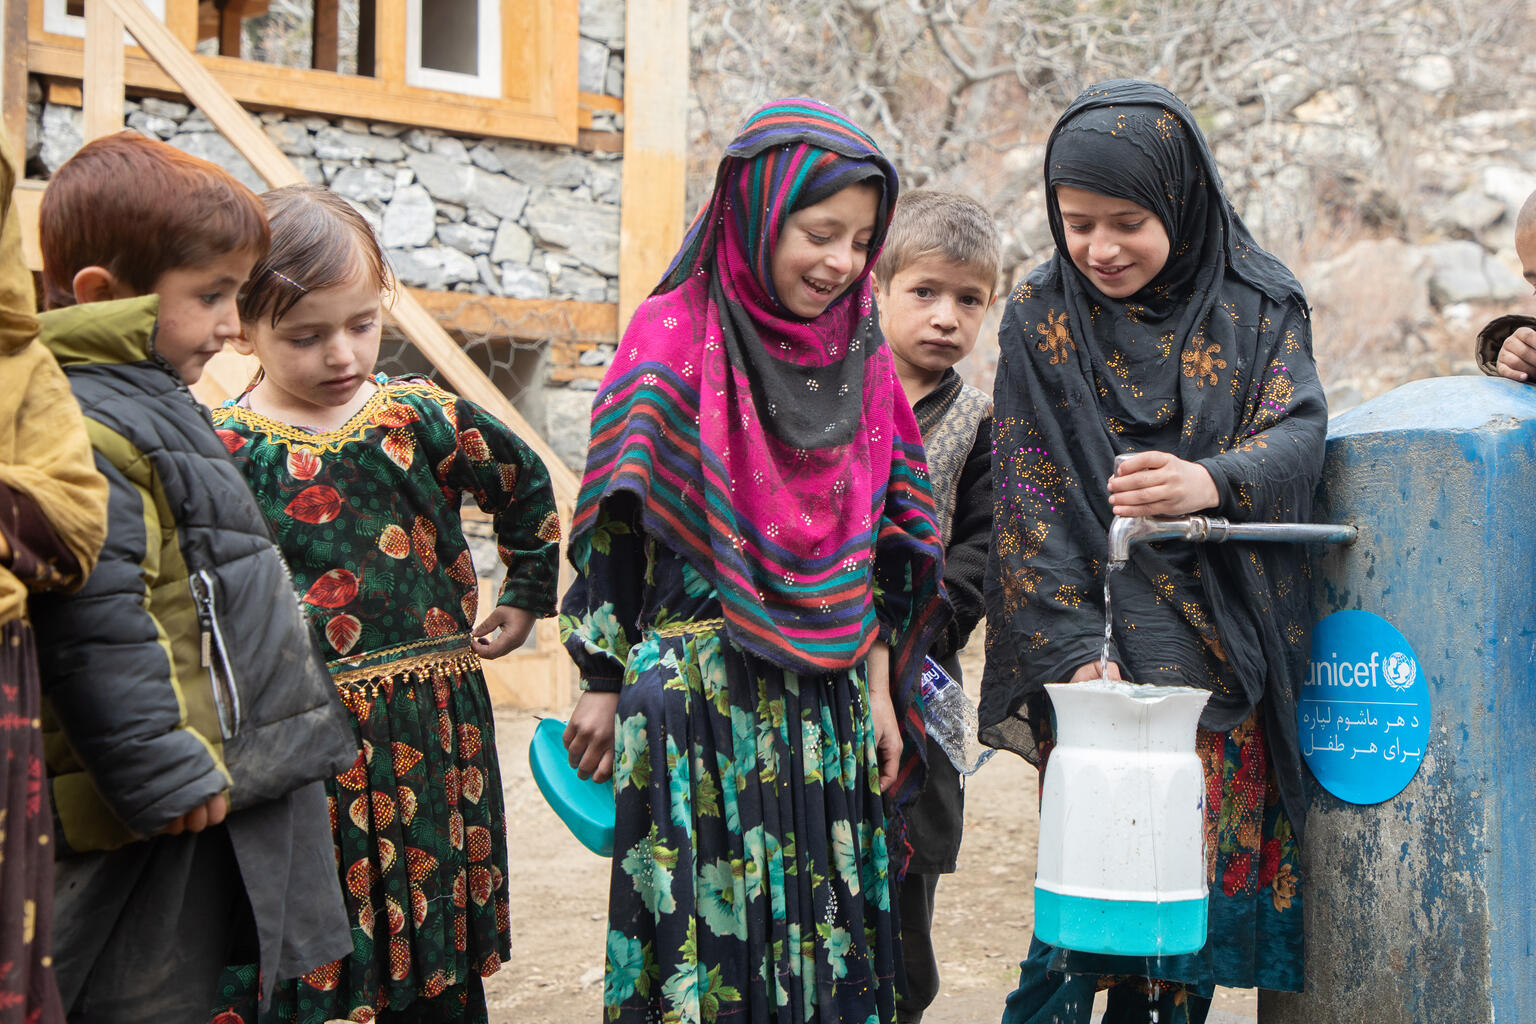 A lifetime of water - Children in Nuristan province's Kantiwa Valley never had clean water before. Now they have as much as they need, whenever they need it.